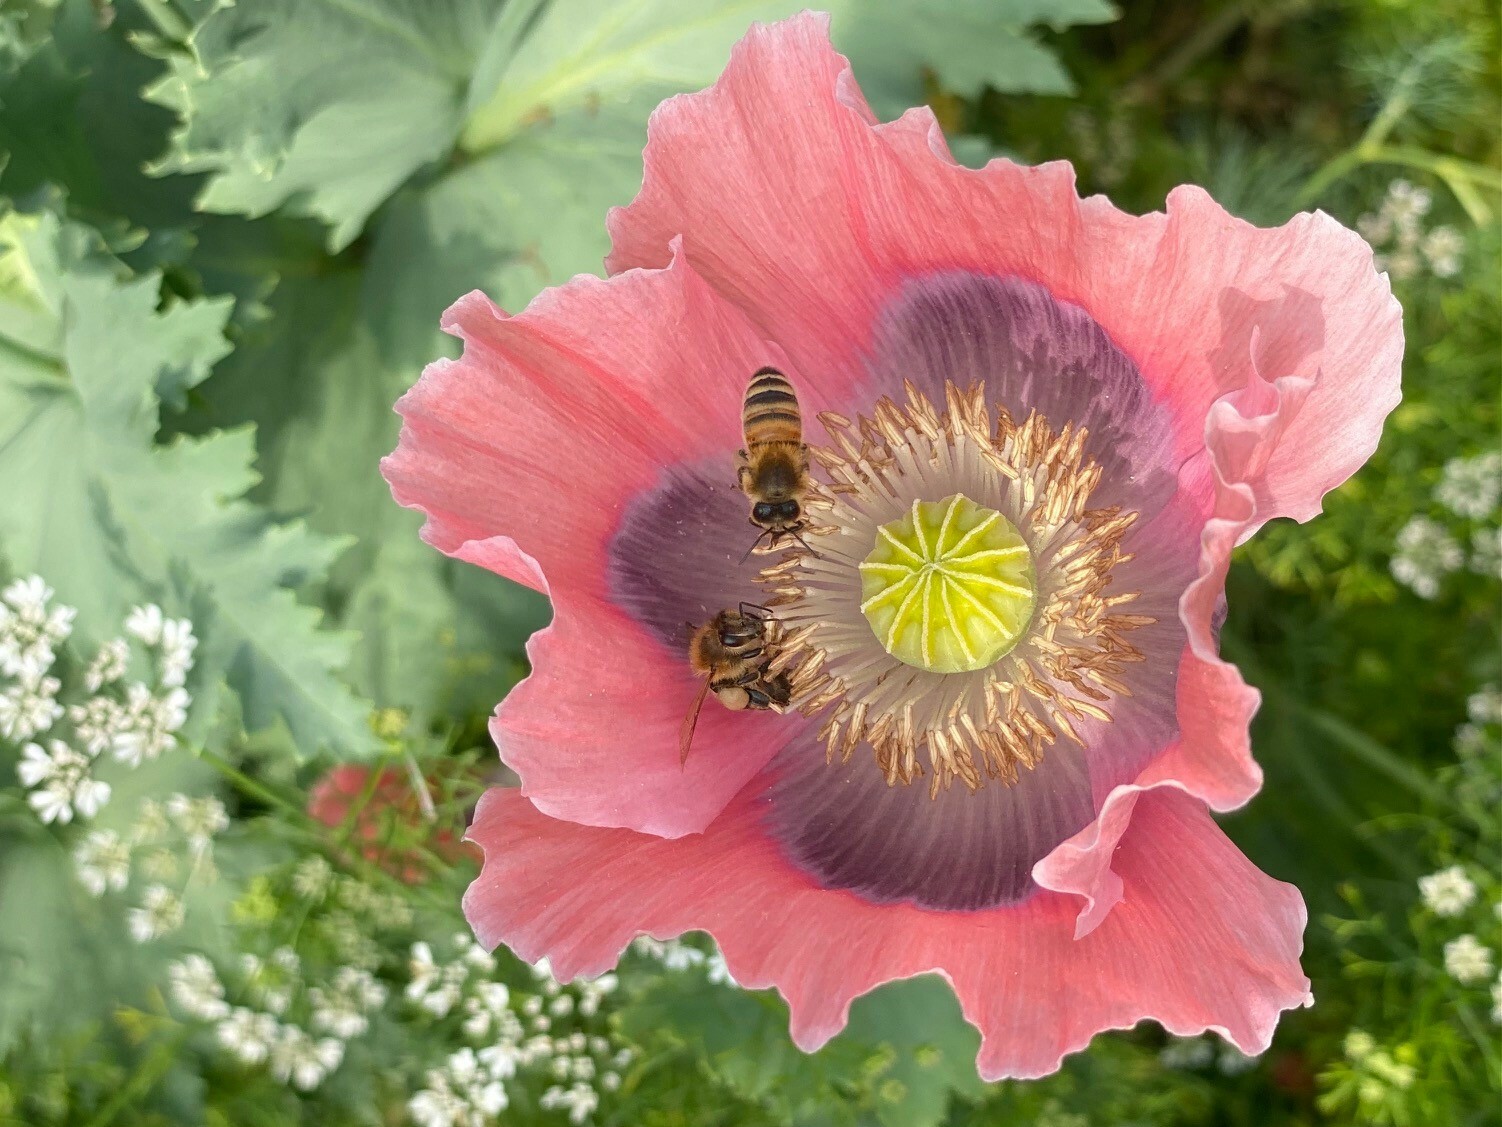 Bees gathering nectar from a poppy in the herb garden